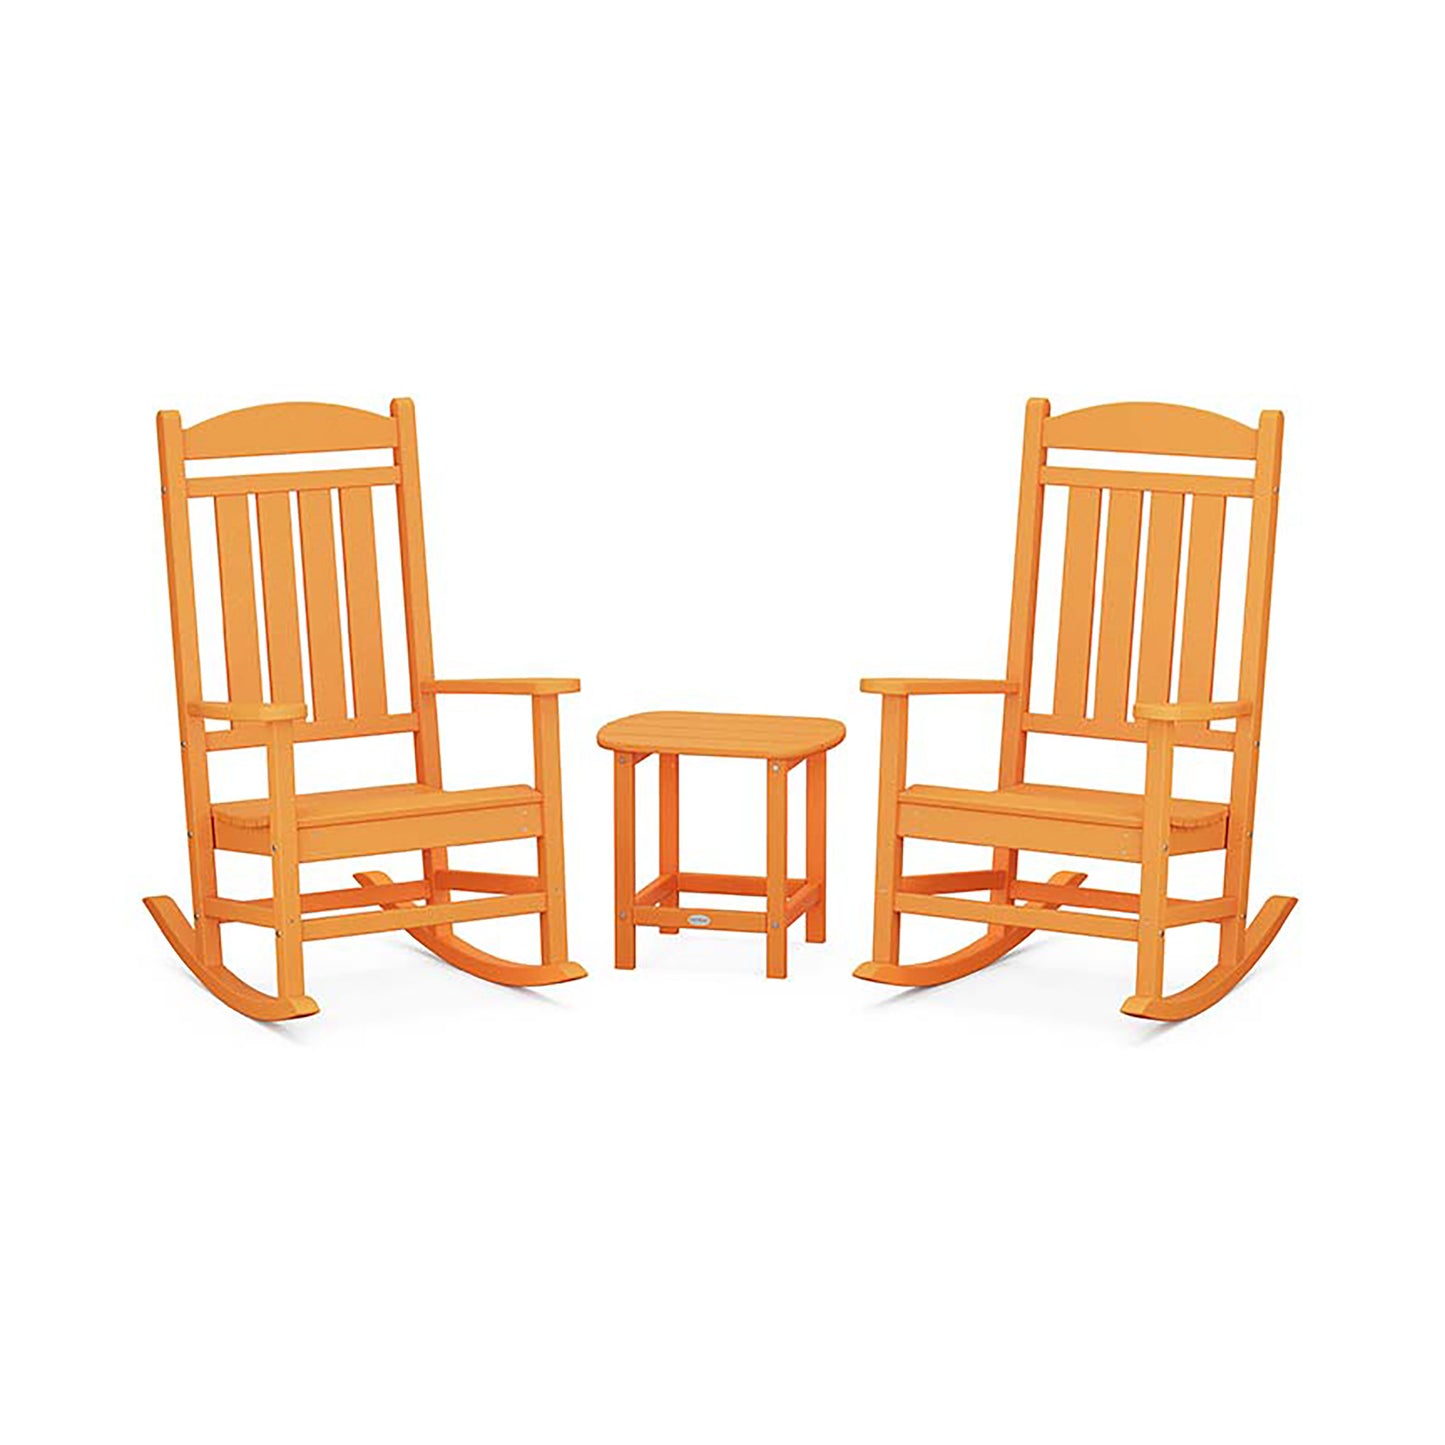 Two POLYWOOD Presidential Outdoor Rocking Chair 3-Piece Sets with a matching round stool, all in a bright orange finish, set against a plain white background.